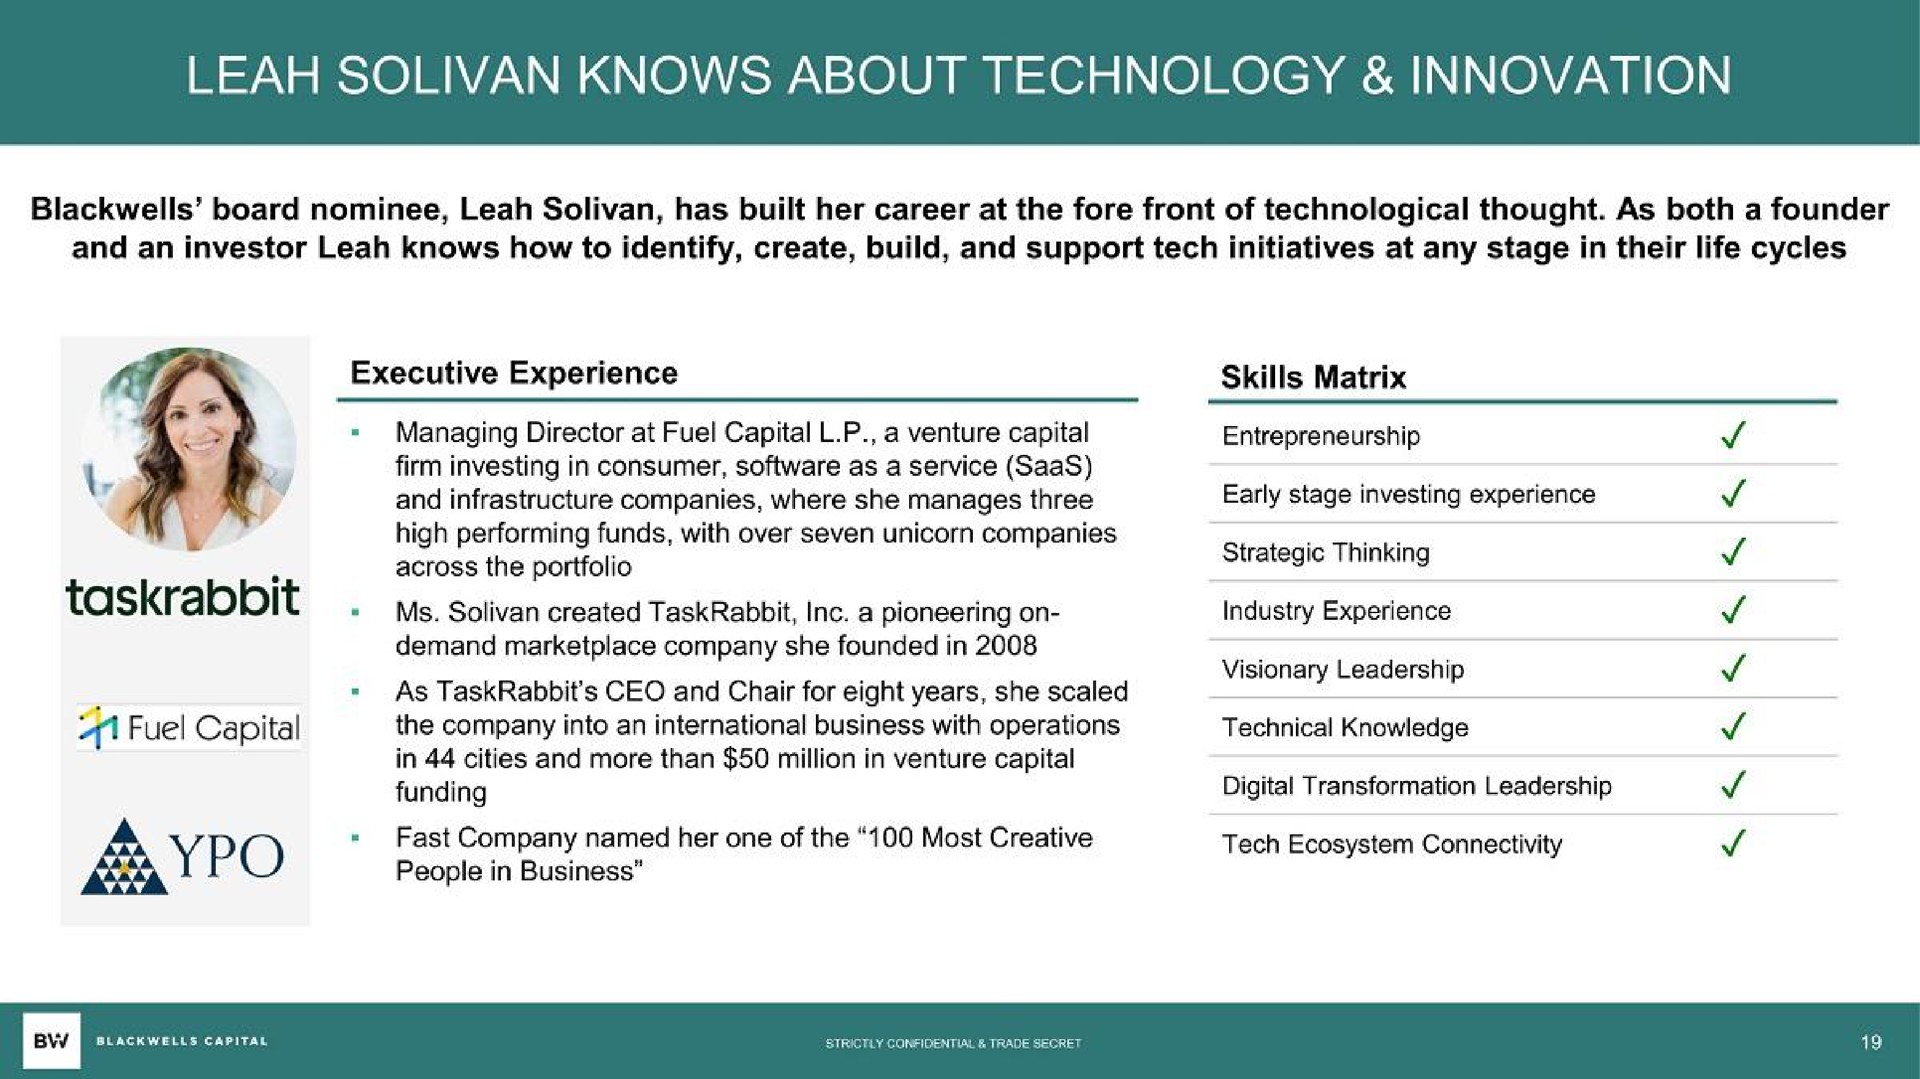 knows about technology innovation | Blackwells Capital